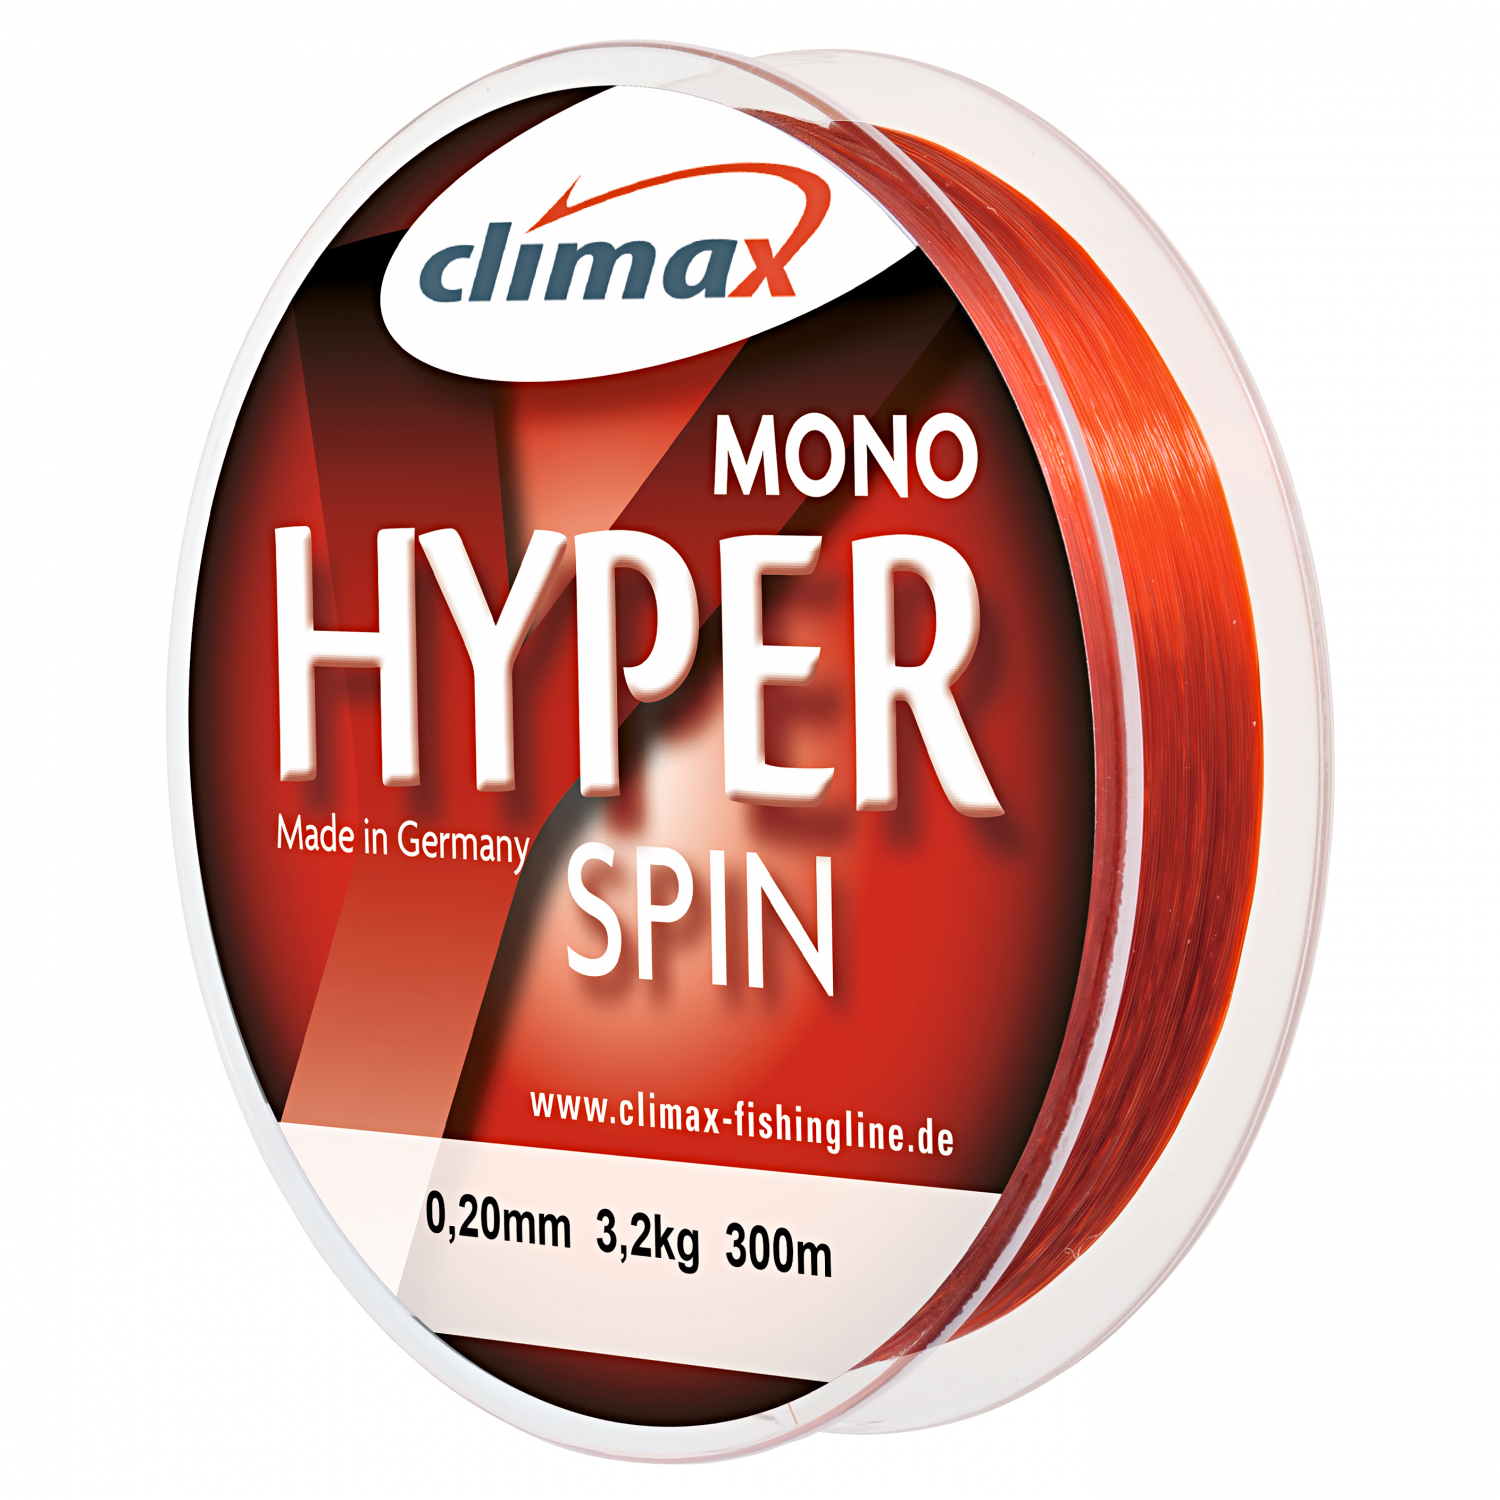 Climax Climax Hyper Spin red Fishing Line 